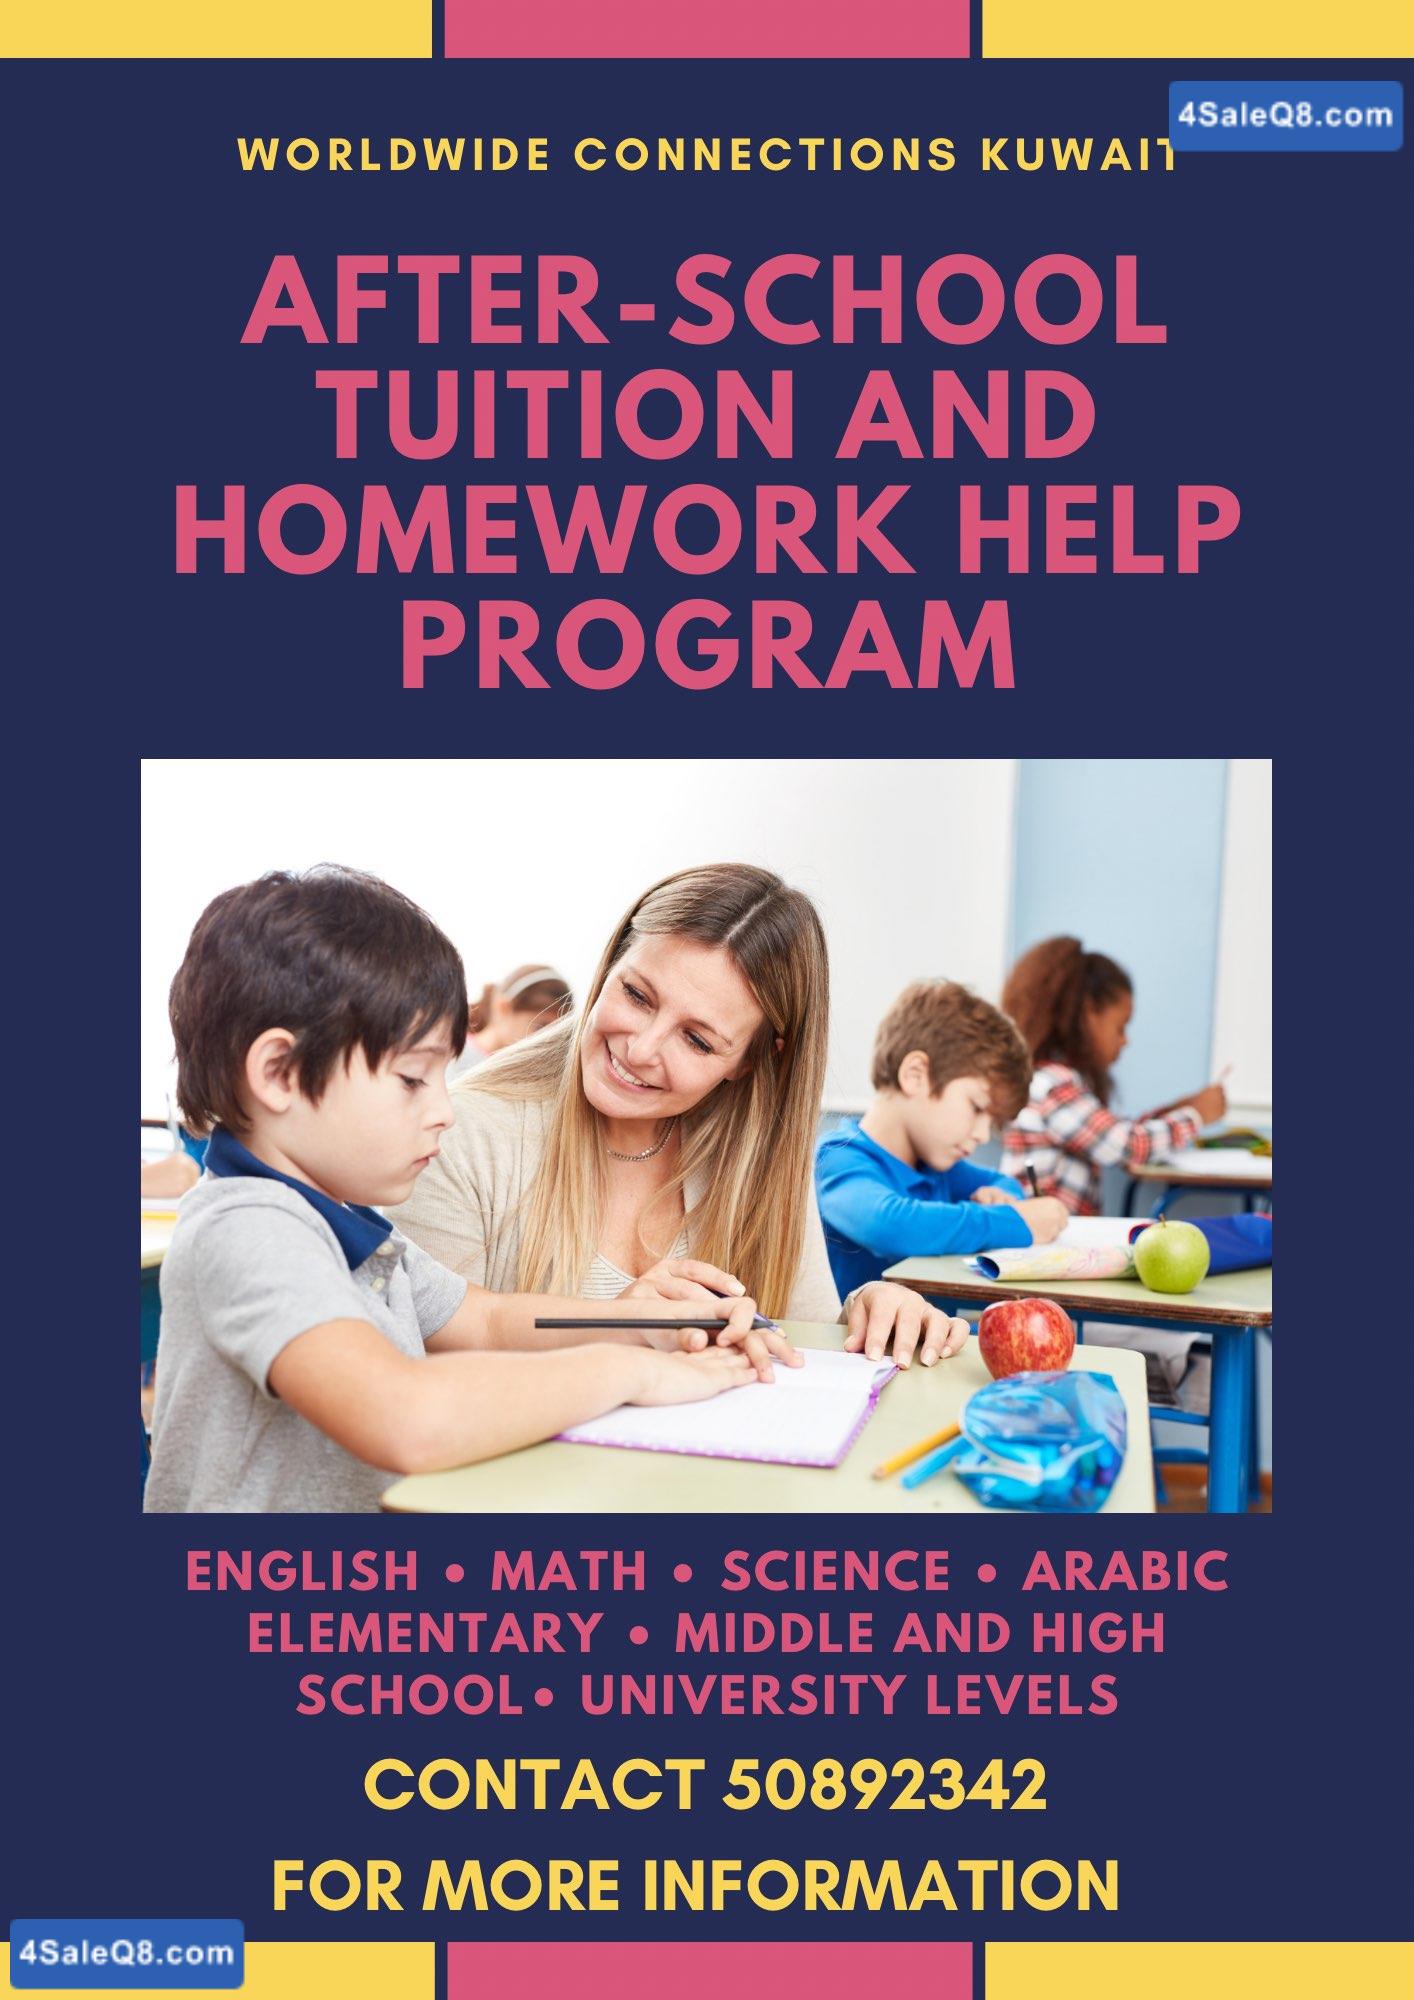 TUITION AND HOMEWORK HELP SERVICES